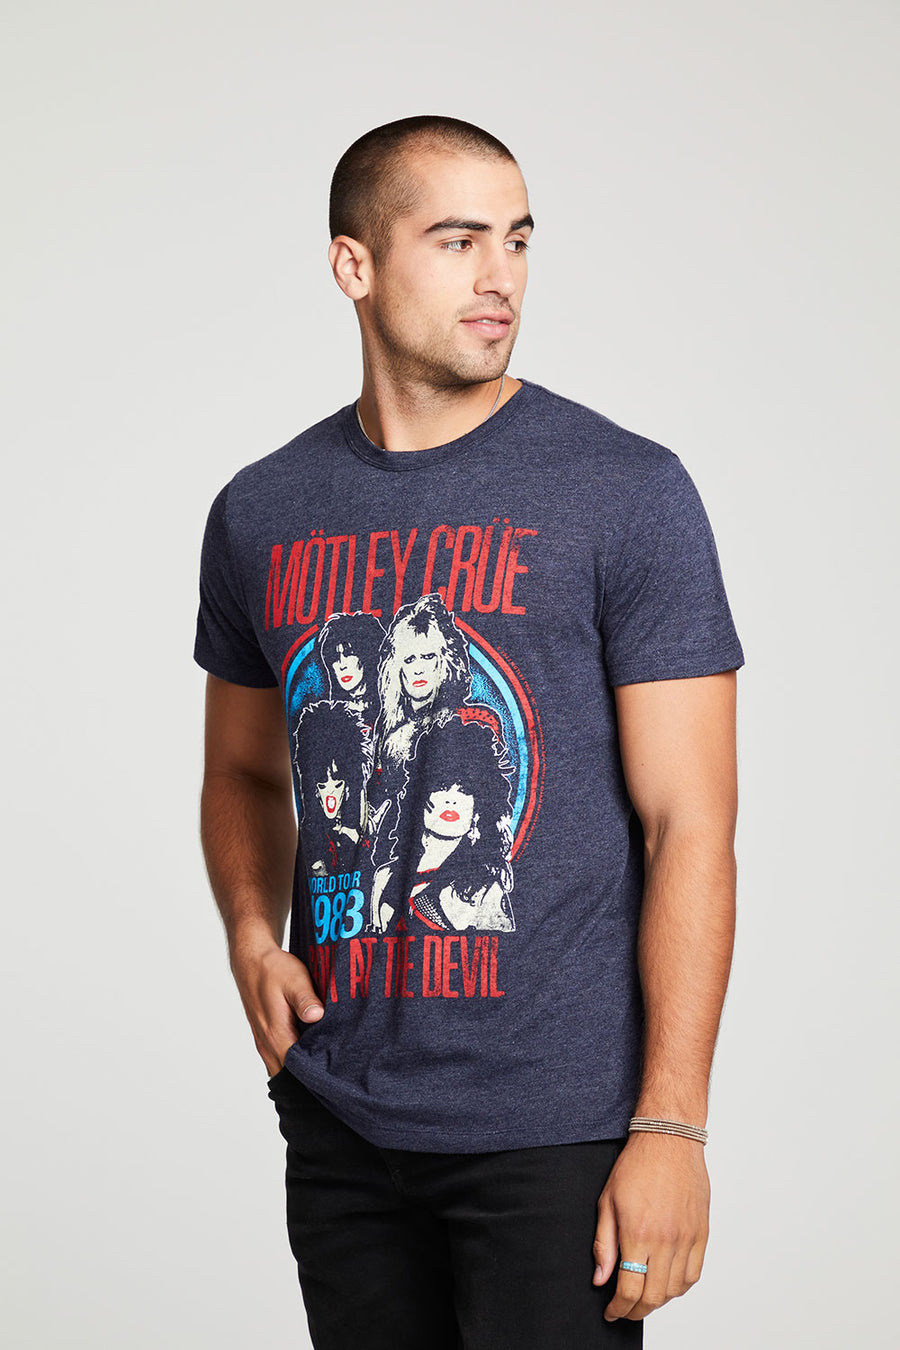 Motley Crue Shout At The Devil MENS chaserbrand